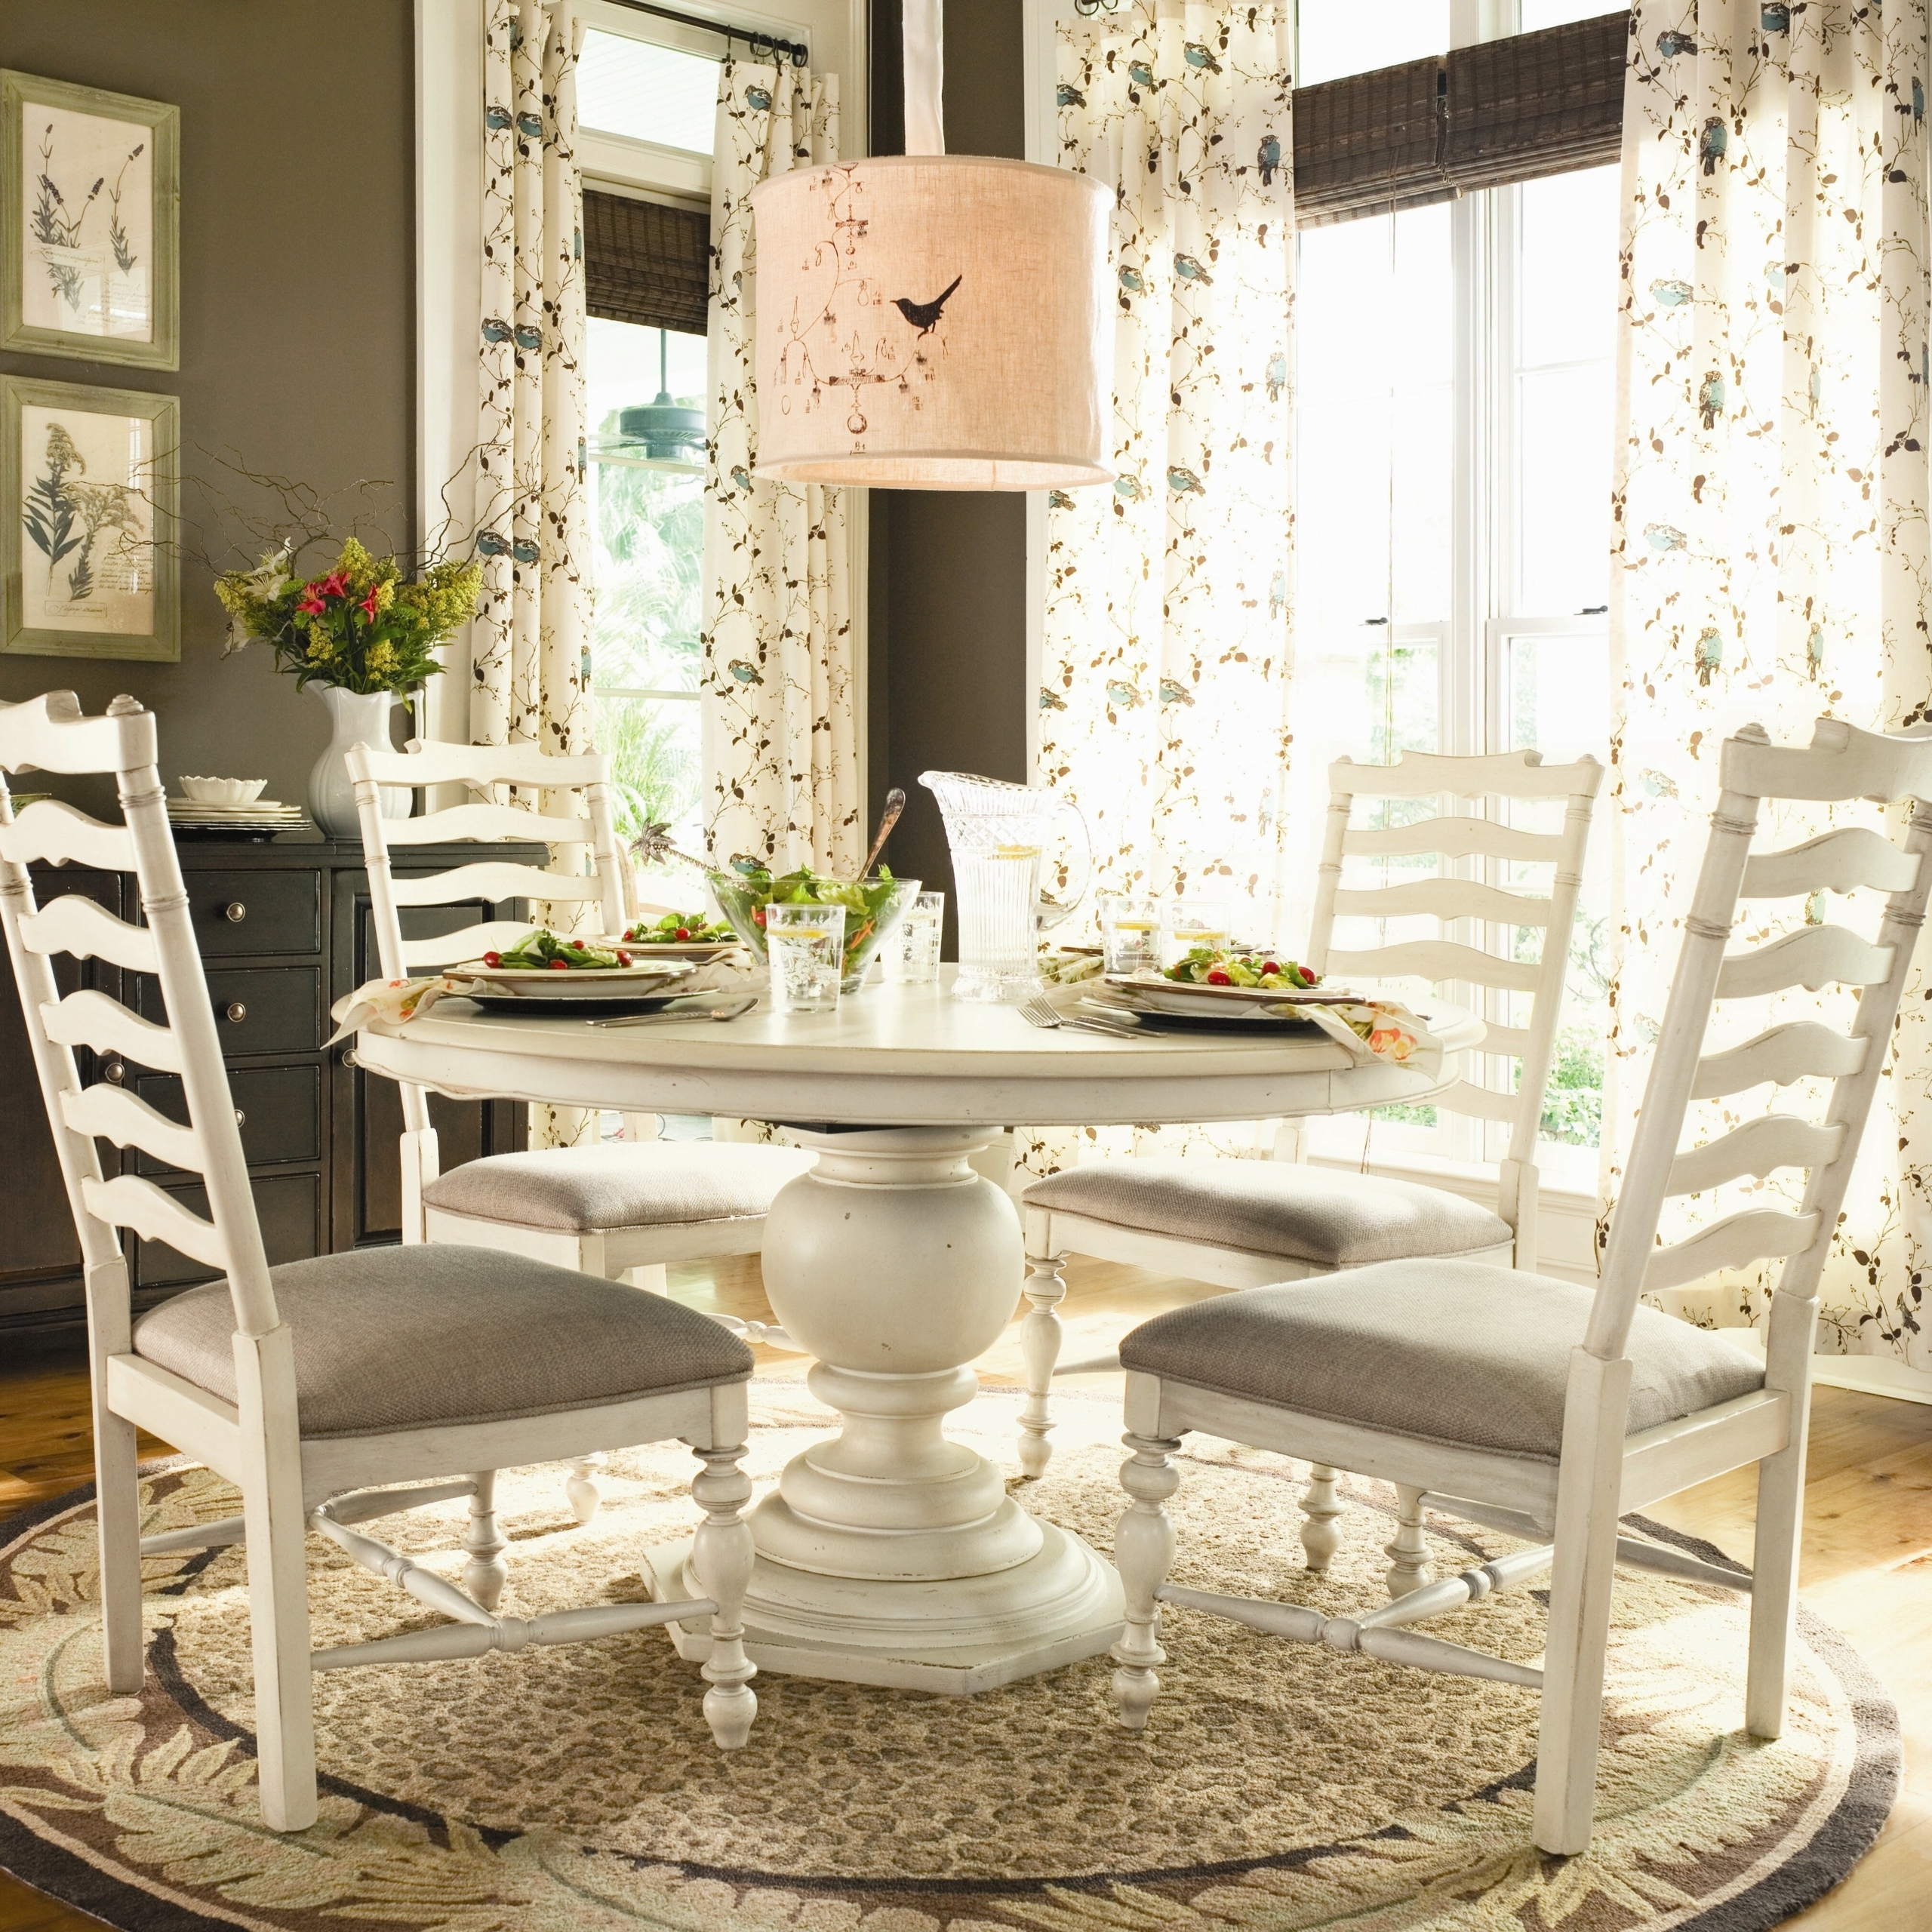 Round White Pedestal Dining Table Ideas On Foter